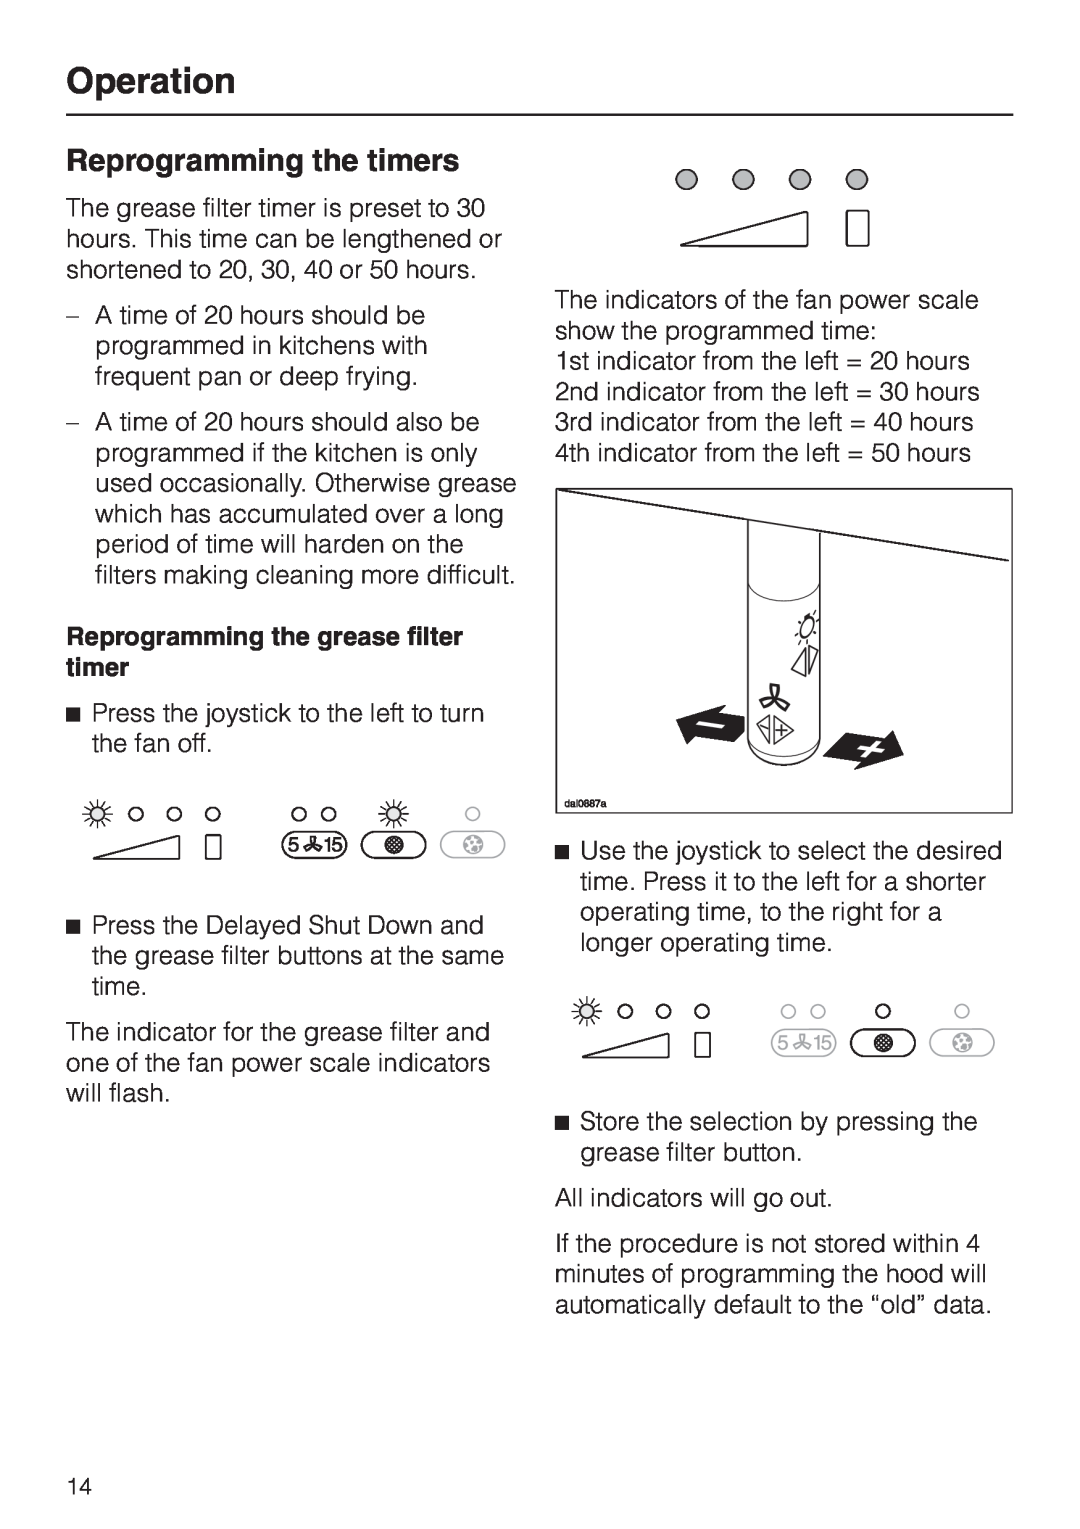 Miele DA362-110 installation instructions Reprogramming the timers, Reprogramming the grease filter timer, Operation 